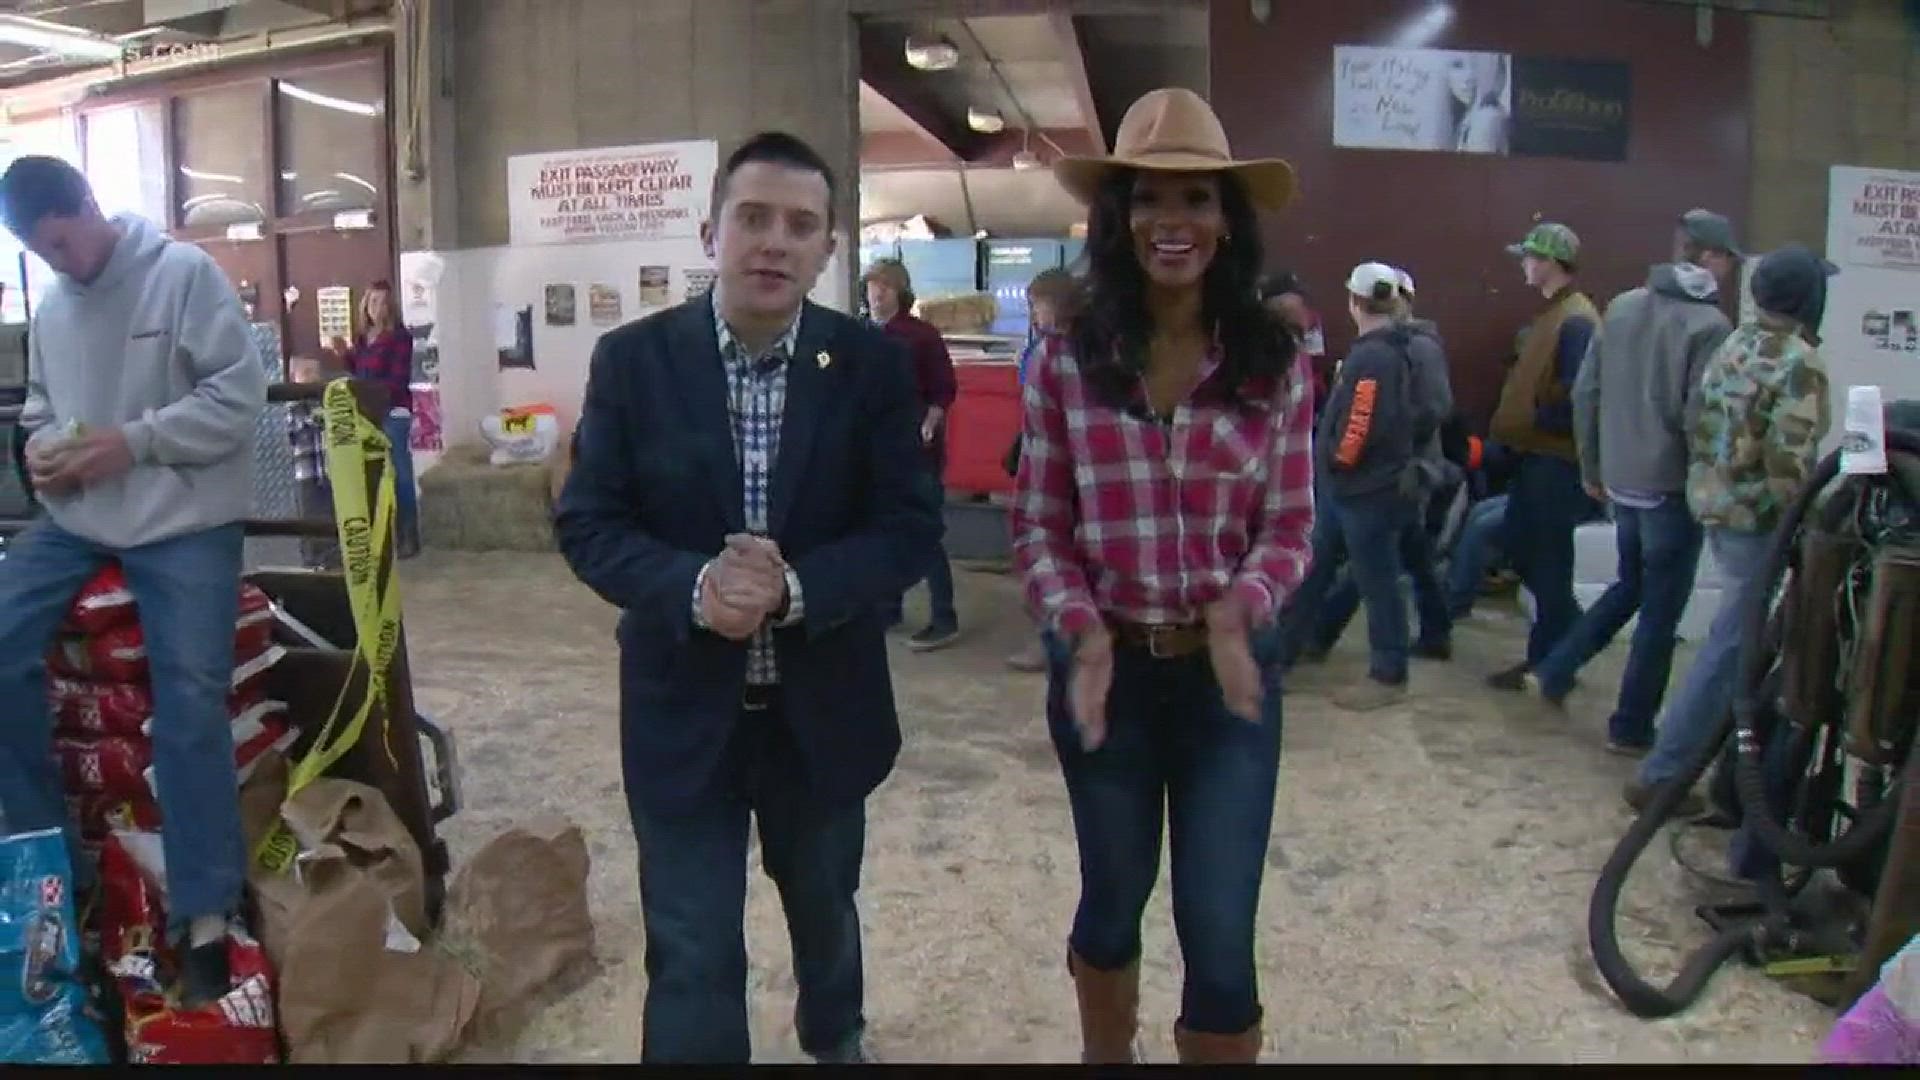 9NEWS Anchors Steve Staeger and TaRhonda Thomas went to the National Western Stock Show, they got put to work. Sometimes the hardest thing to do is stay clean!